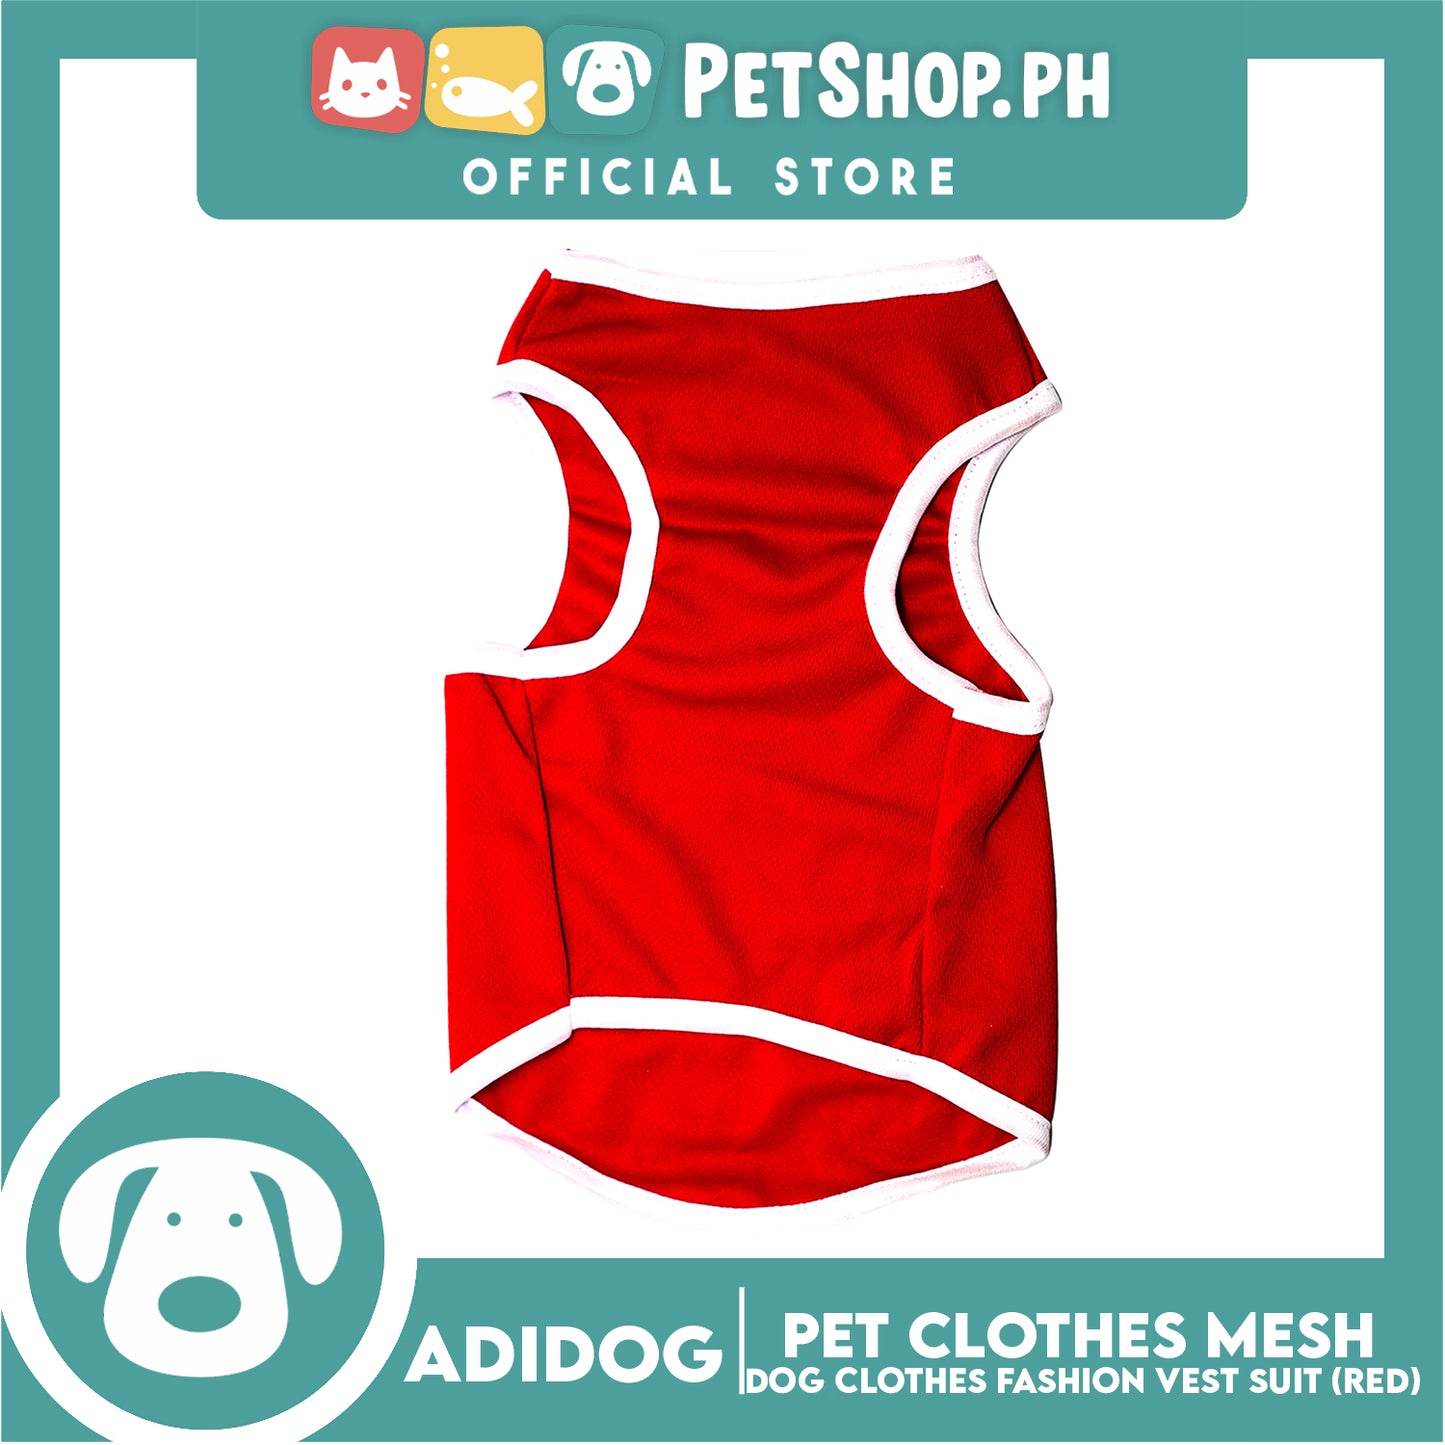 Adidog Pet Clothes Mesh Vet, Summer Dog Clothes, Breathable Mesh Vet, Dog Shirt, Pet Jersey, Fashion Vest Suit for Dogs (Red) (Small.)